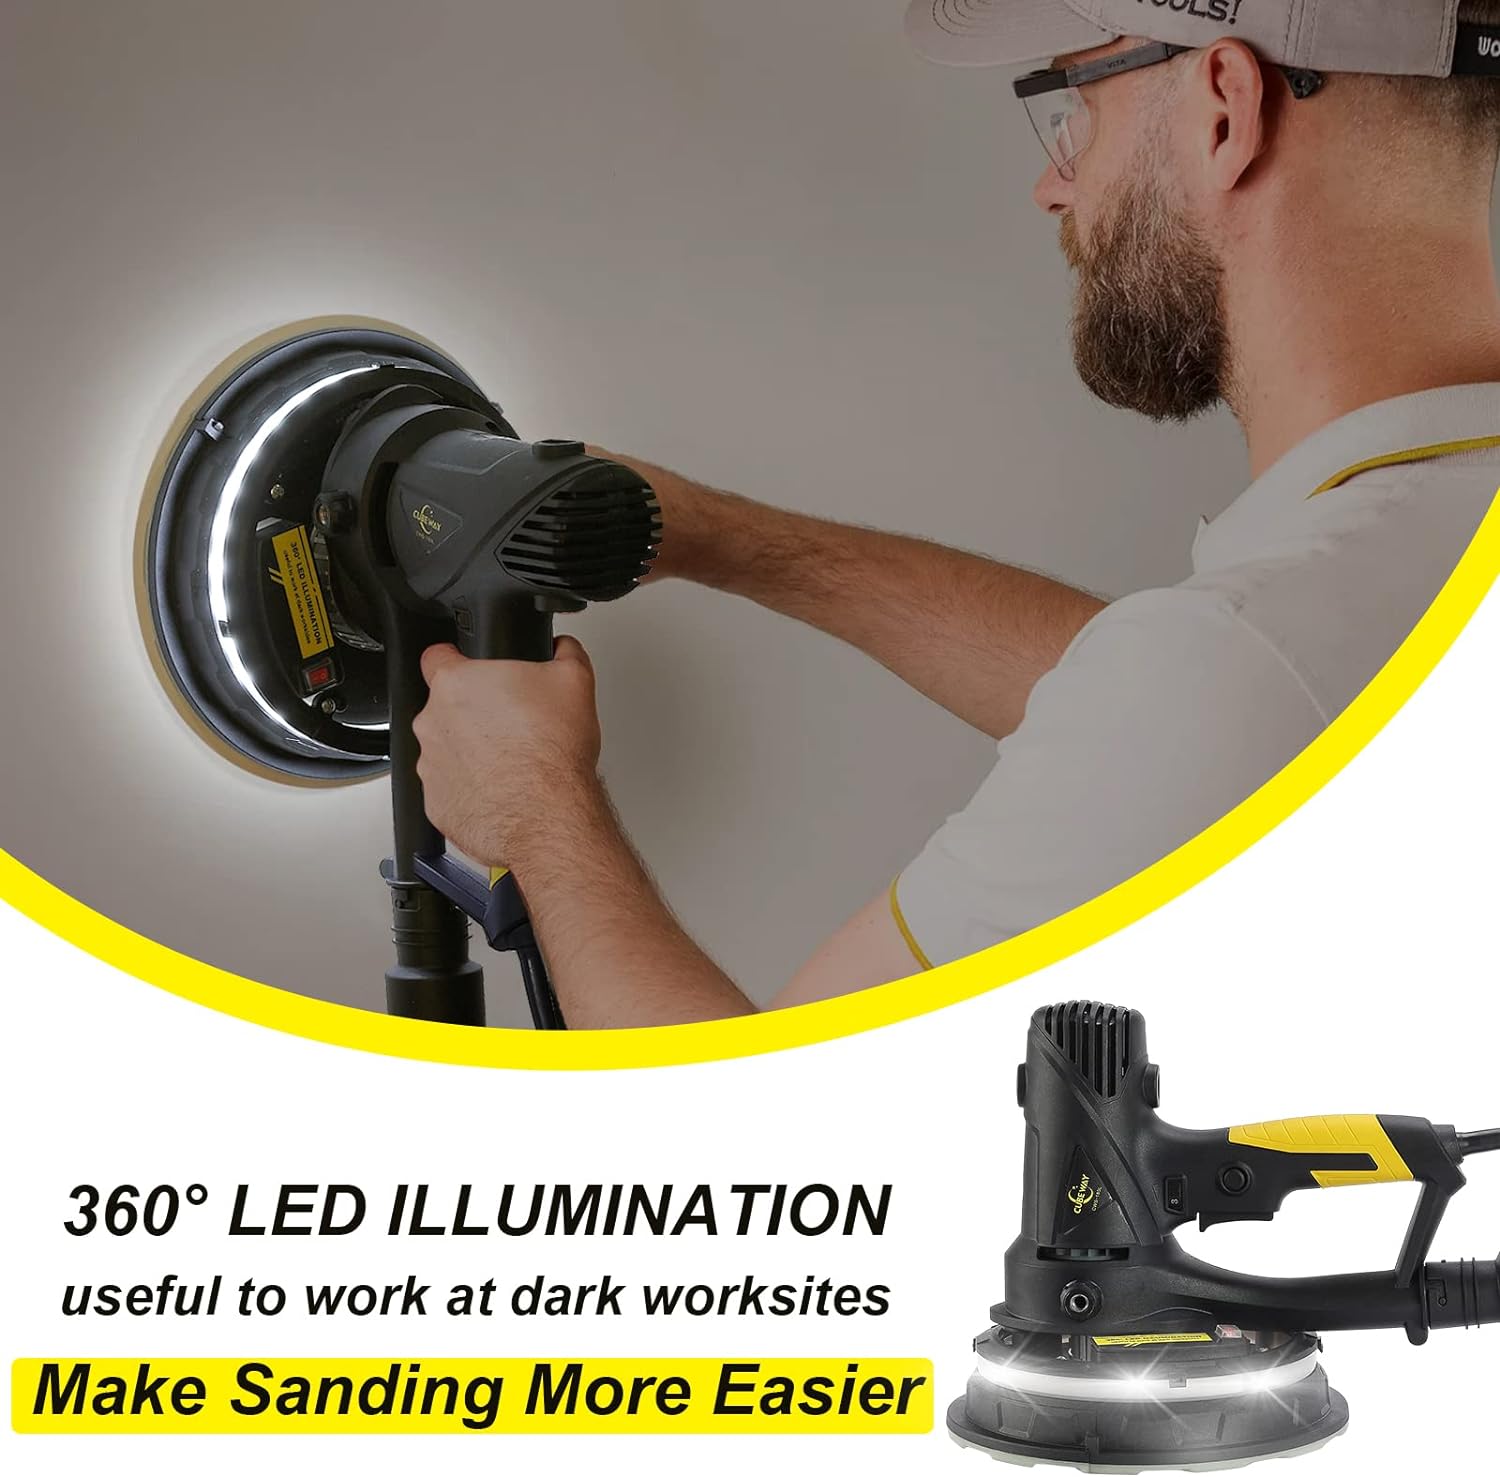 CUBEWAY Drywall Sander, Handheld Electric Drywall Sander with Vacuum Attachment and Variable Speed, Sheetrock Sander Machine with LED L